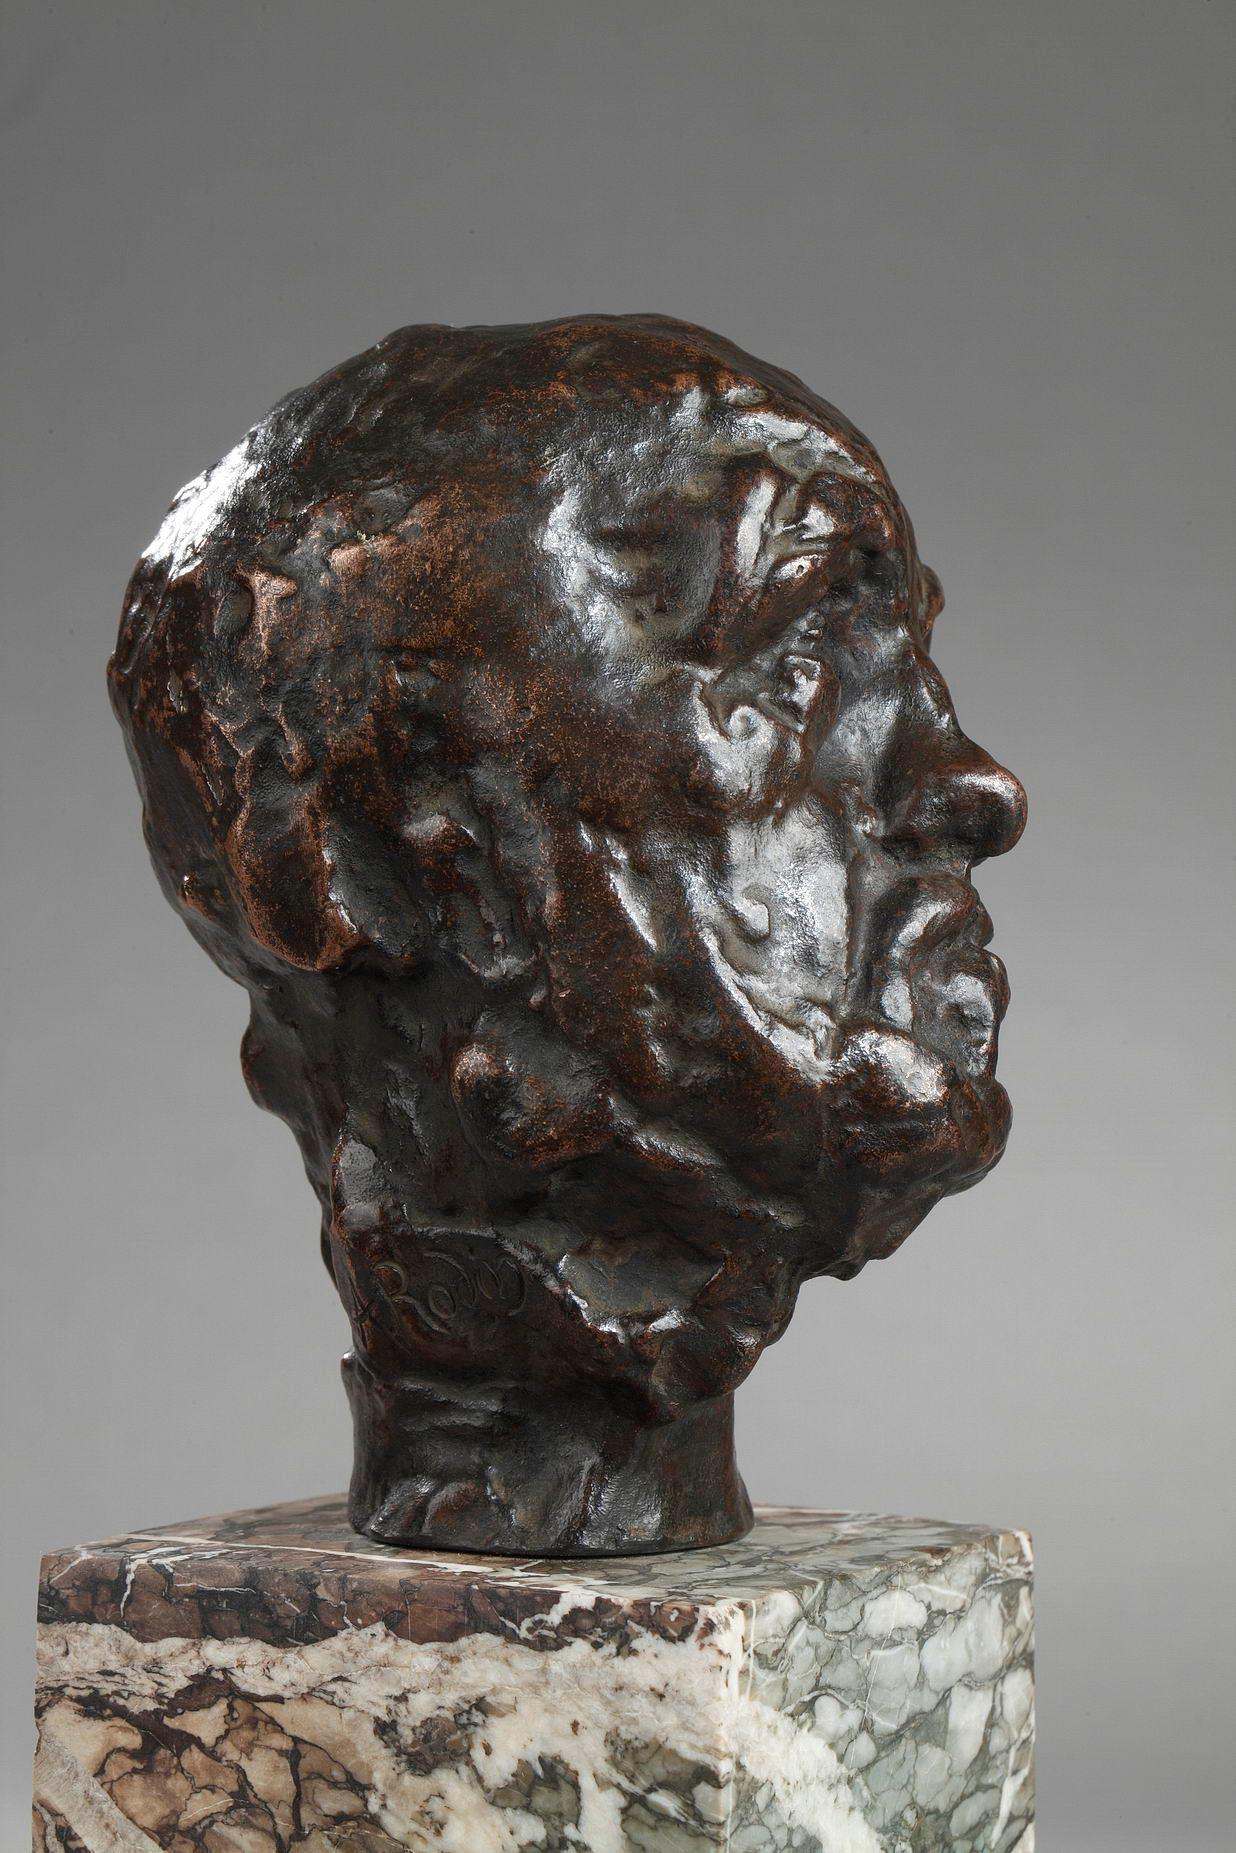 Small head of the Man with the broken nose - Gold Figurative Sculpture by Auguste Rodin